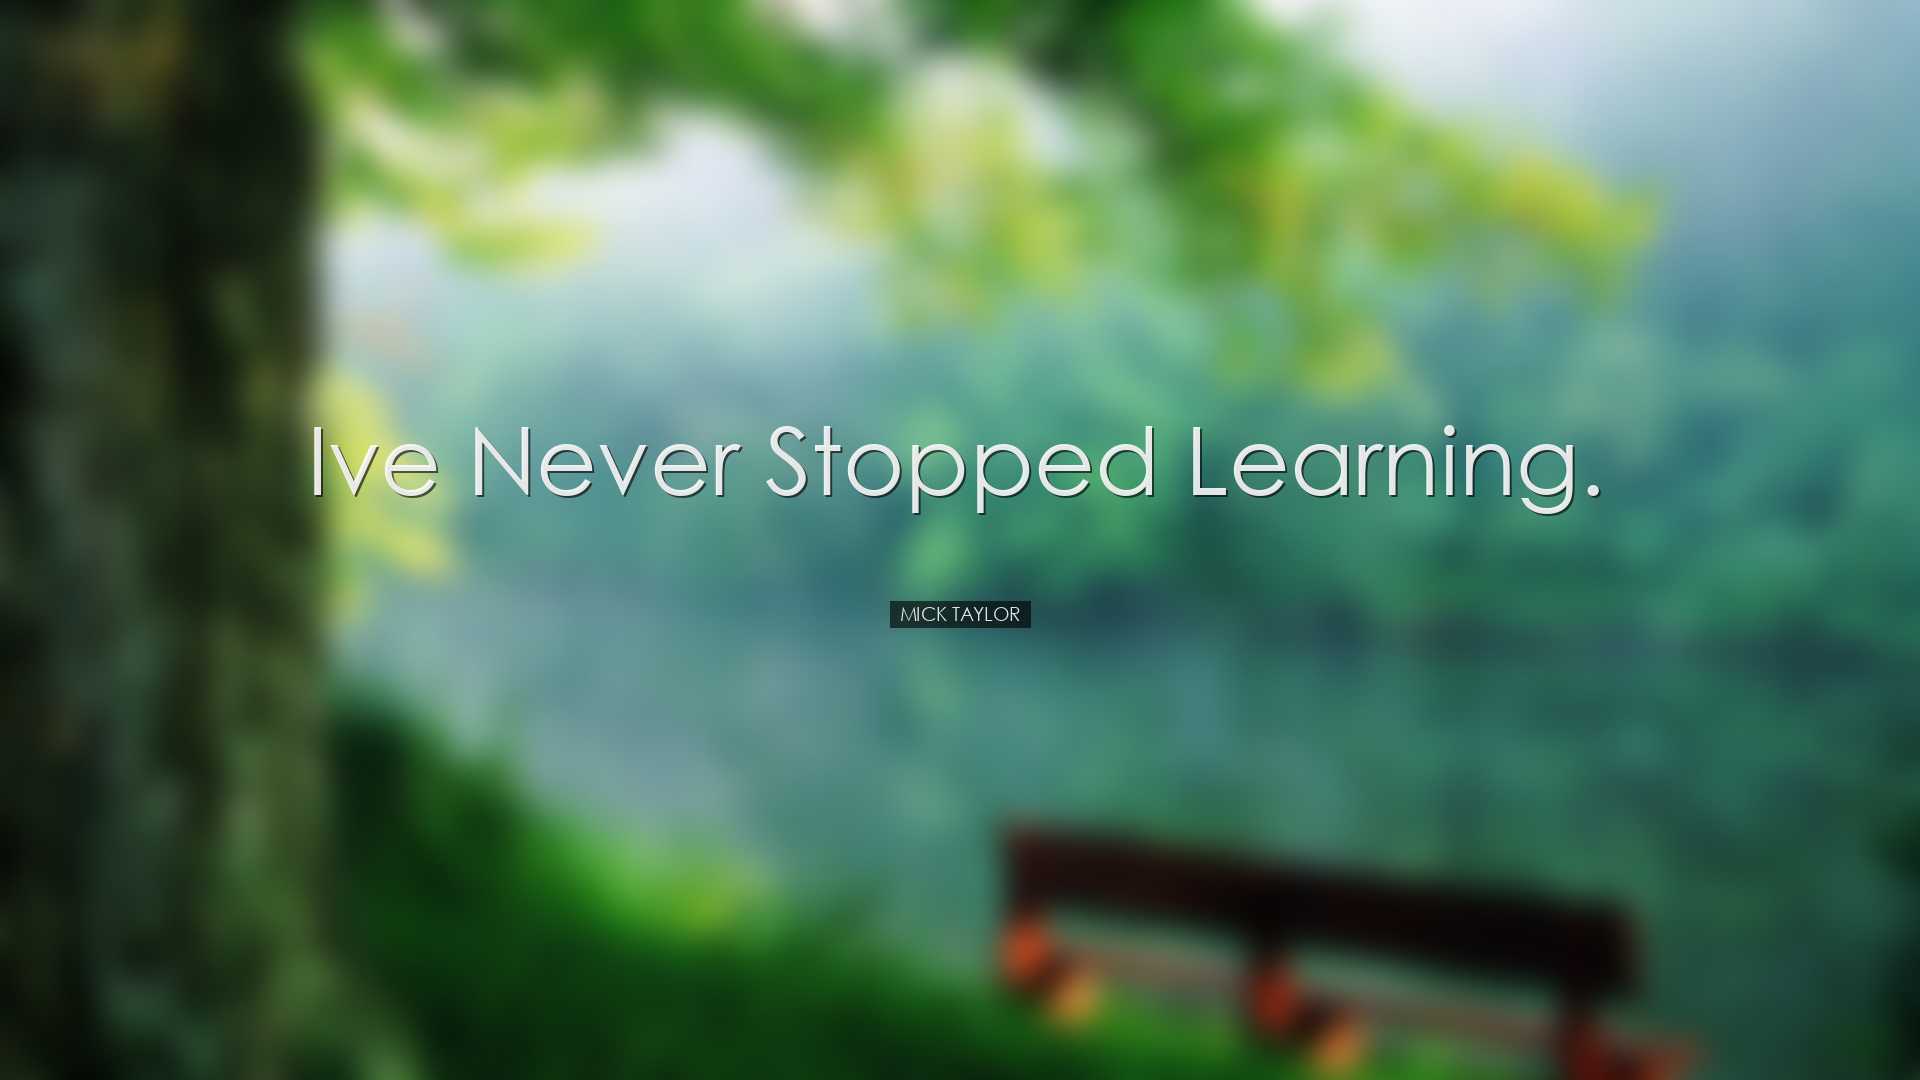 Ive never stopped learning. - Mick Taylor